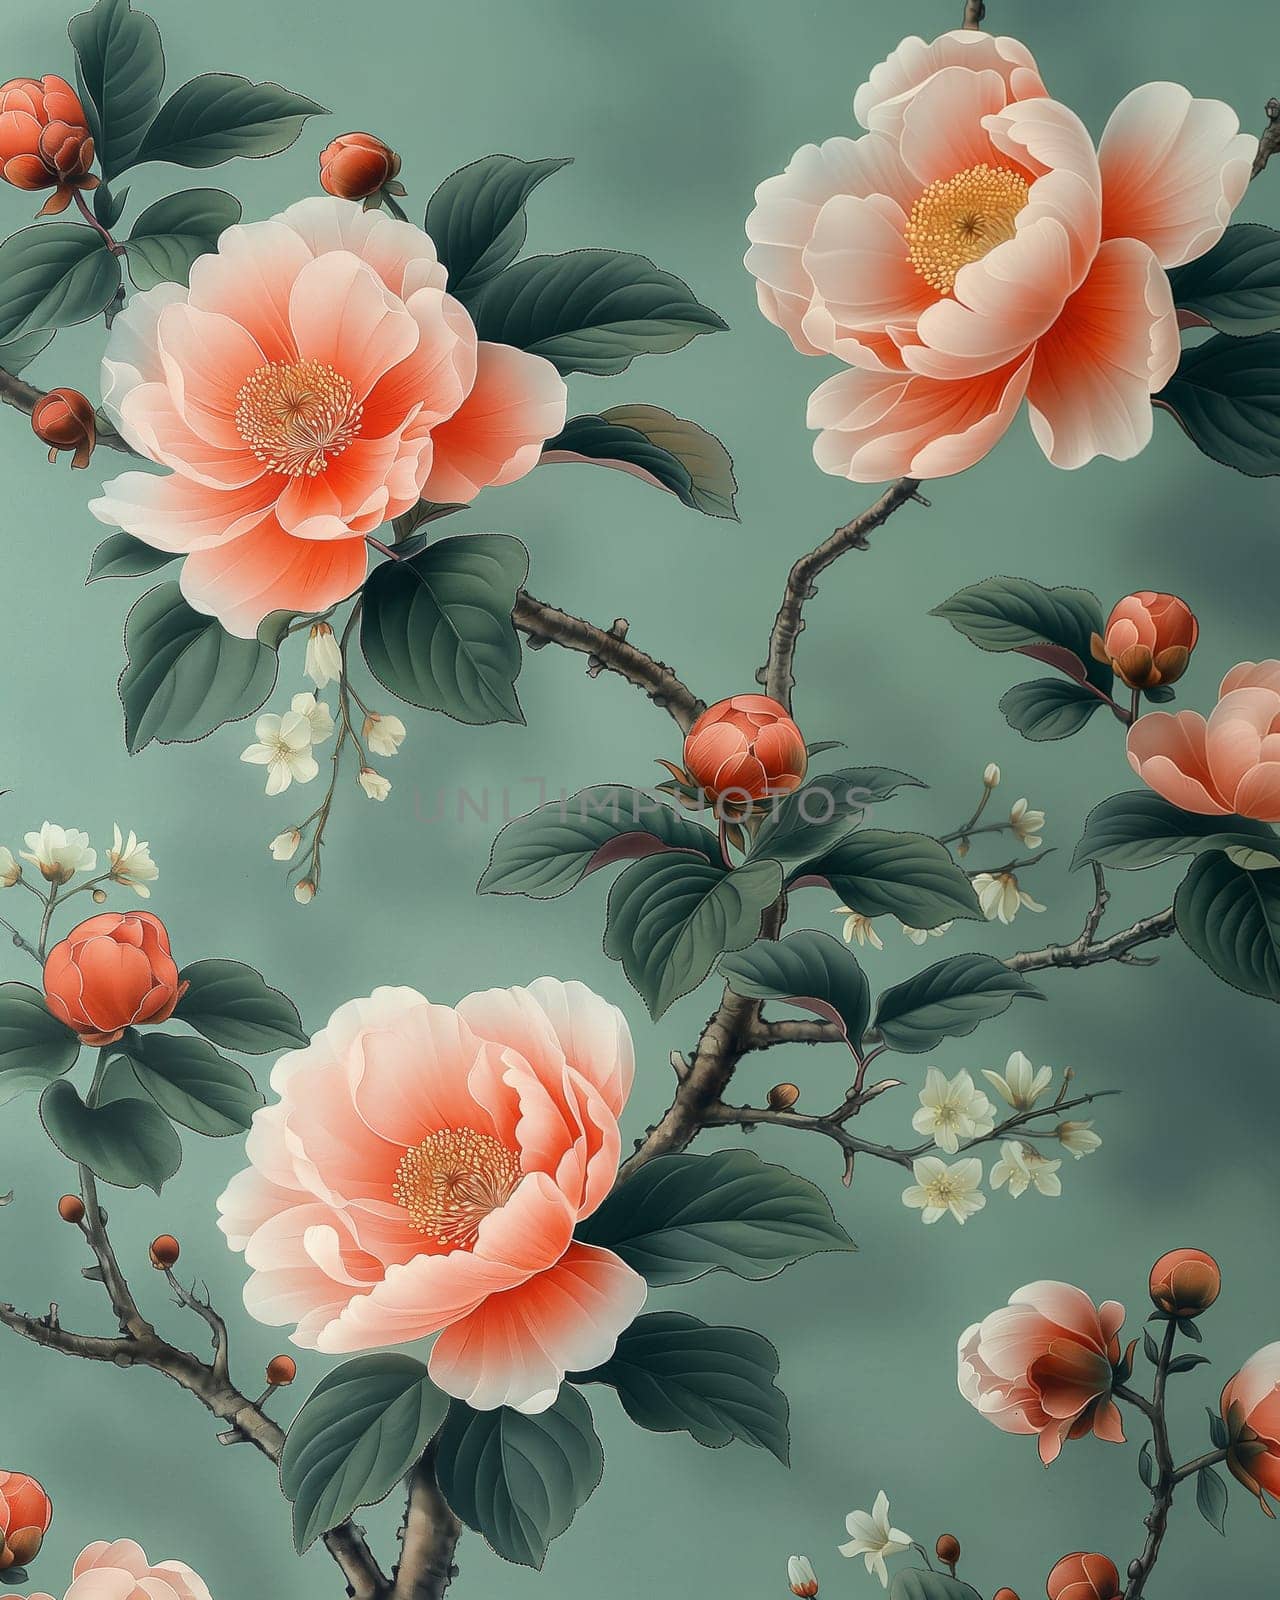 Wallpaper in chinoiserie style depicting large flower. by Fischeron